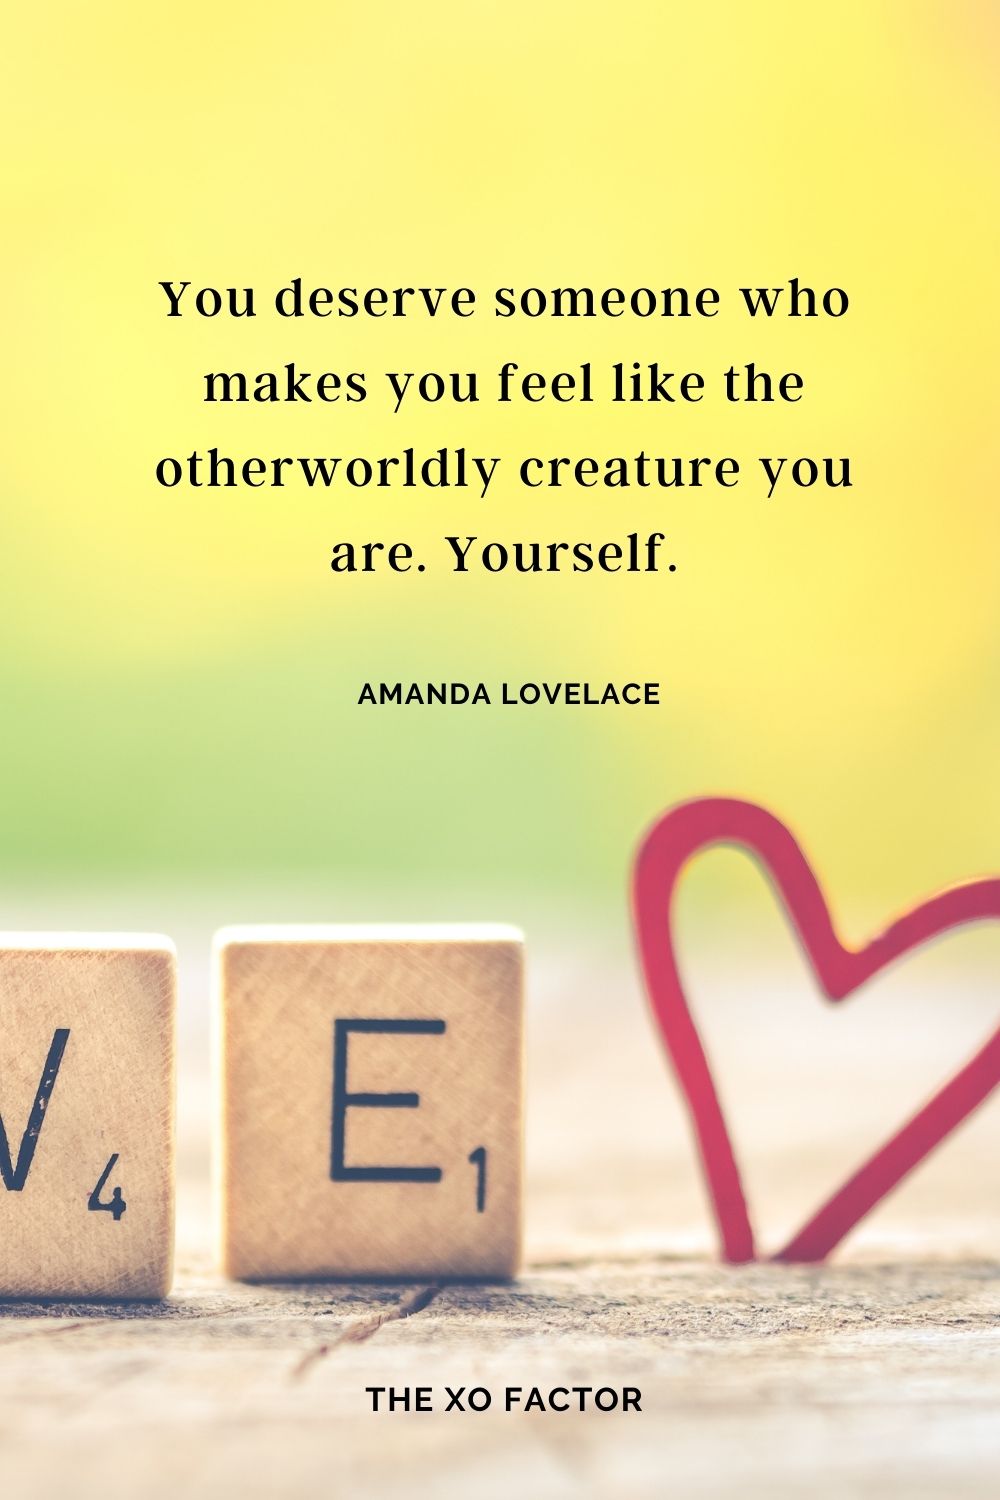 You deserve someone who makes you feel like the otherworldly creature you are. Yourself. Amanda Lovelace